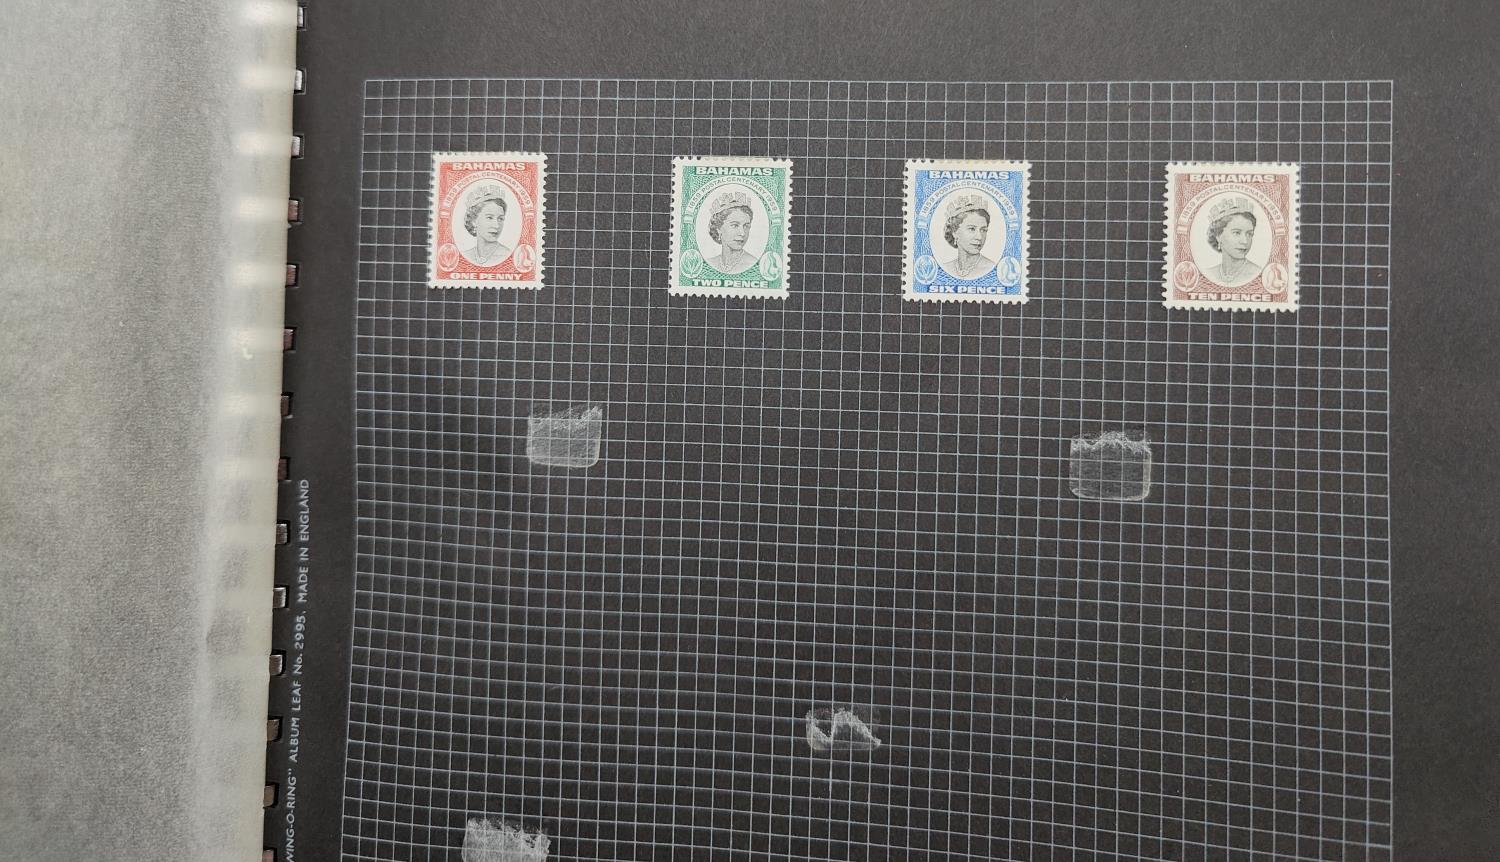 BERMUDA - QEII definitives to £1; a collection of other Commonwealth mint stamps mounted in album - Image 2 of 8